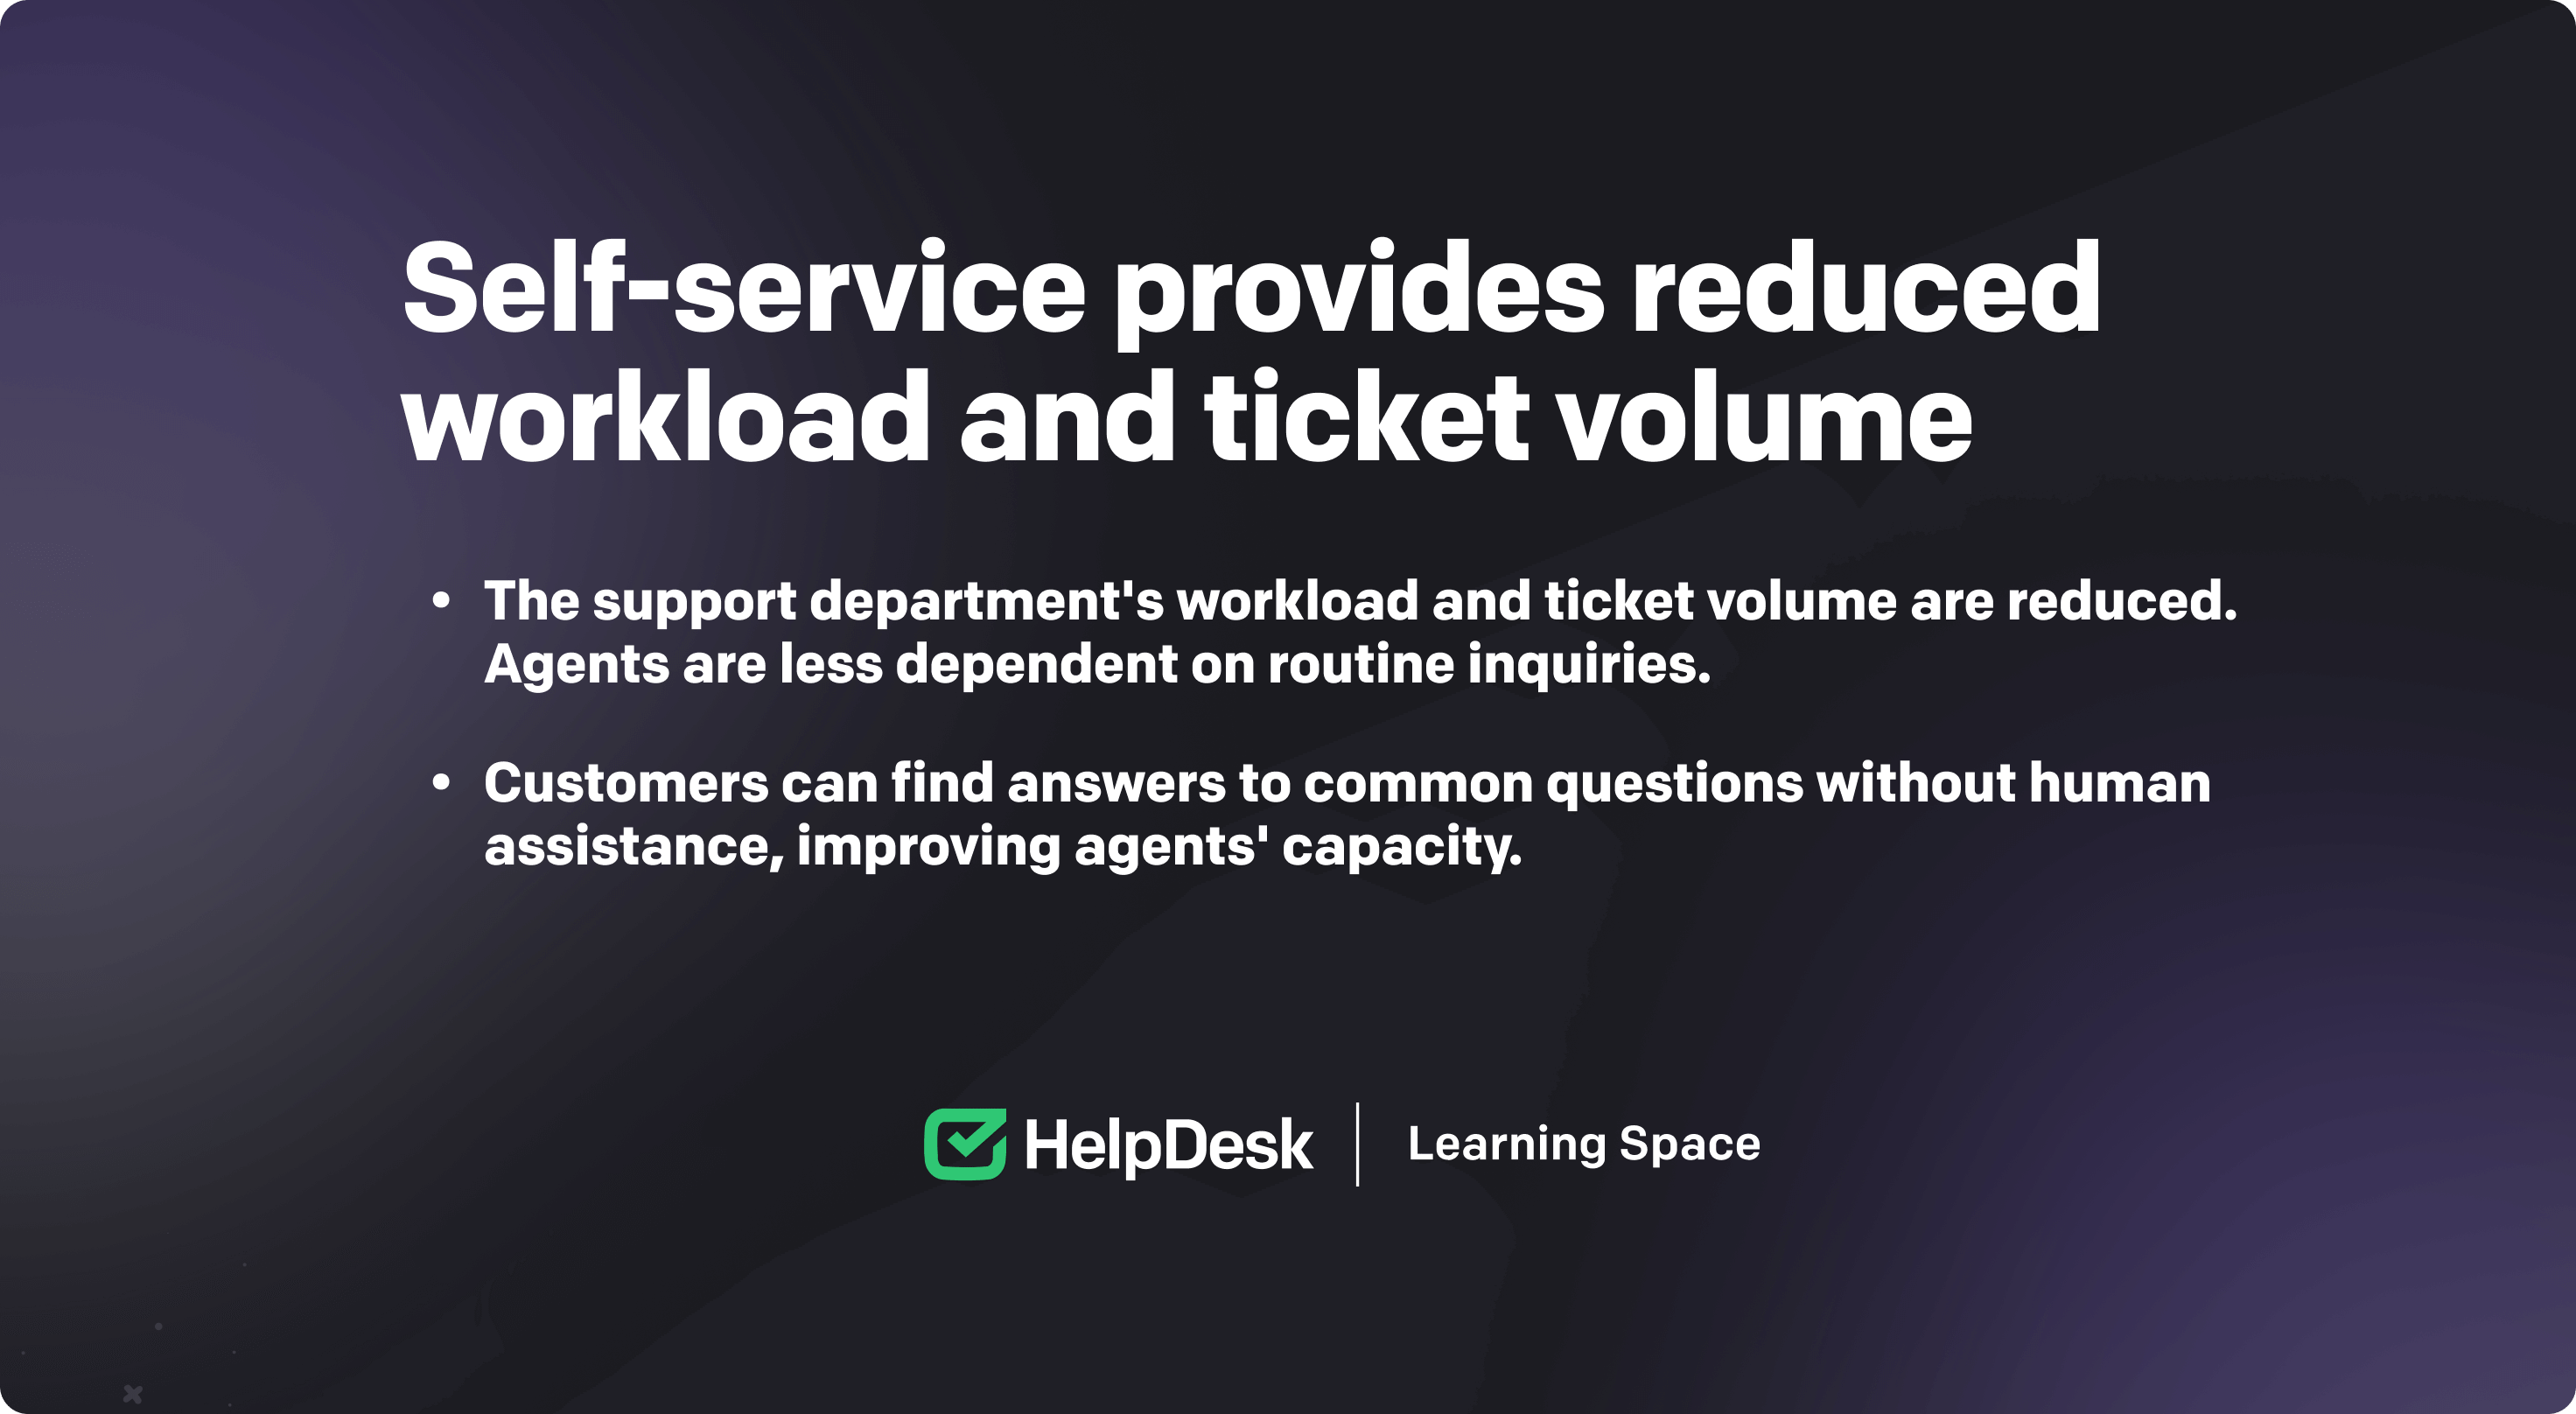 Self-service benefits for support teams: reduced workload and ticket volume.